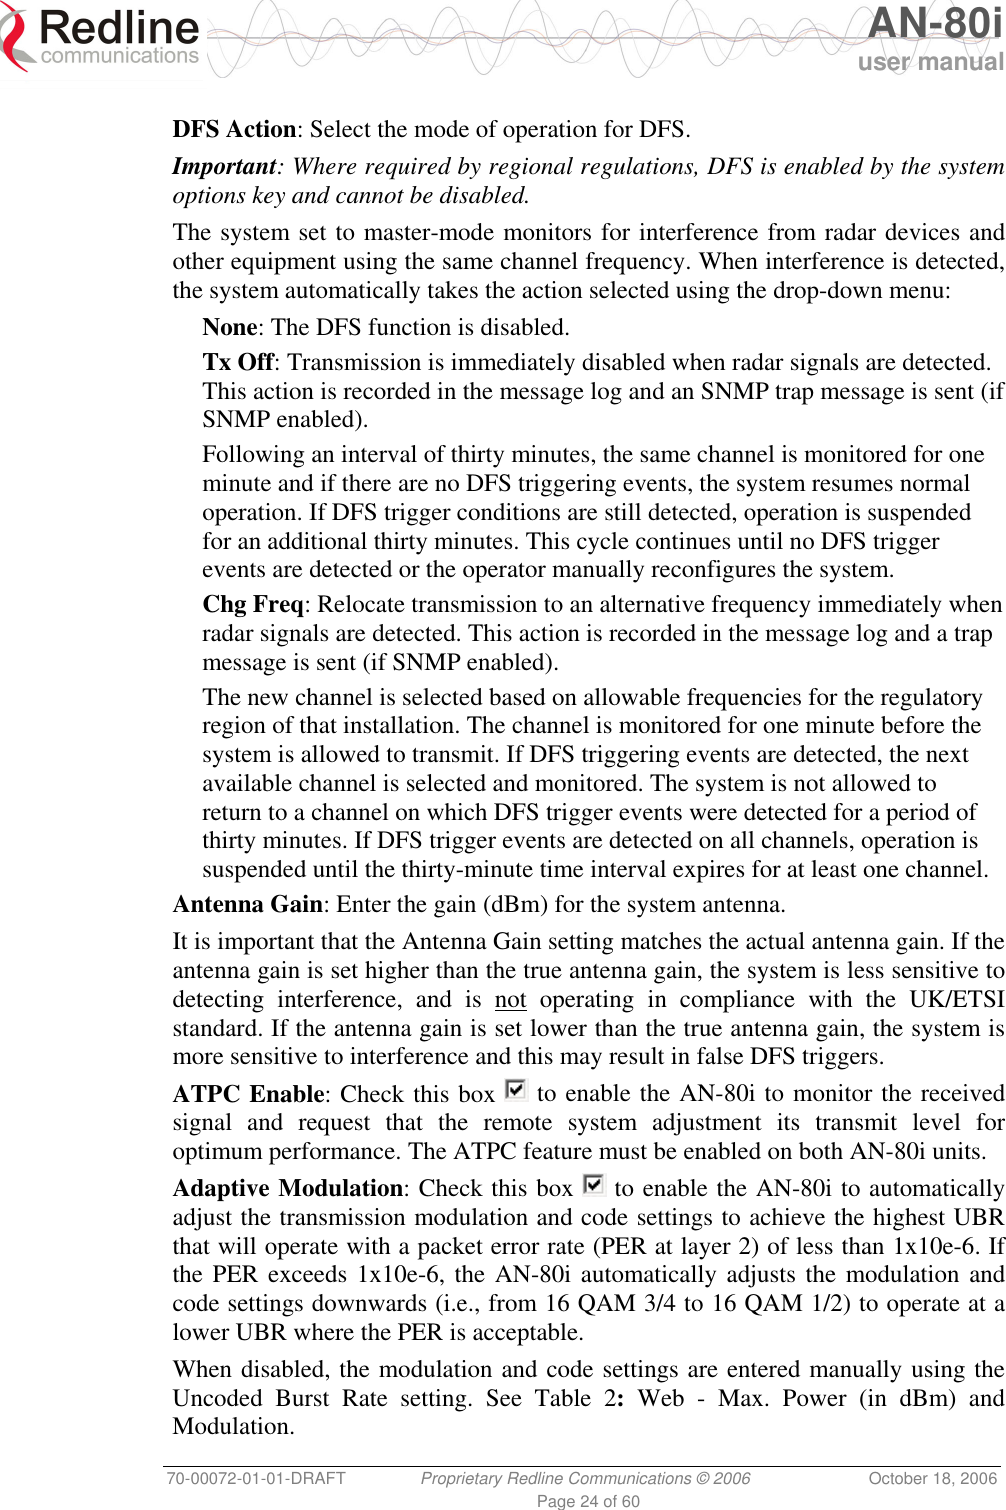   AN-80i user manual 70-00072-01-01-DRAFT  Proprietary Redline Communications © 2006  October 18, 2006 Page 24 of 60  DFS Action: Select the mode of operation for DFS. Important: Where required by regional regulations, DFS is enabled by the system options key and cannot be disabled. The system set to master-mode monitors for interference from radar devices and other equipment using the same channel frequency. When interference is detected, the system automatically takes the action selected using the drop-down menu: None: The DFS function is disabled. Tx Off: Transmission is immediately disabled when radar signals are detected. This action is recorded in the message log and an SNMP trap message is sent (if SNMP enabled). Following an interval of thirty minutes, the same channel is monitored for one minute and if there are no DFS triggering events, the system resumes normal operation. If DFS trigger conditions are still detected, operation is suspended for an additional thirty minutes. This cycle continues until no DFS trigger events are detected or the operator manually reconfigures the system. Chg Freq: Relocate transmission to an alternative frequency immediately when radar signals are detected. This action is recorded in the message log and a trap message is sent (if SNMP enabled). The new channel is selected based on allowable frequencies for the regulatory region of that installation. The channel is monitored for one minute before the system is allowed to transmit. If DFS triggering events are detected, the next available channel is selected and monitored. The system is not allowed to return to a channel on which DFS trigger events were detected for a period of thirty minutes. If DFS trigger events are detected on all channels, operation is suspended until the thirty-minute time interval expires for at least one channel. Antenna Gain: Enter the gain (dBm) for the system antenna.  It is important that the Antenna Gain setting matches the actual antenna gain. If the antenna gain is set higher than the true antenna gain, the system is less sensitive to detecting interference, and is not operating in compliance with the UK/ETSI standard. If the antenna gain is set lower than the true antenna gain, the system is more sensitive to interference and this may result in false DFS triggers. ATPC Enable: Check this box   to enable the AN-80i to monitor the received signal and request that the remote system adjustment its transmit level for optimum performance. The ATPC feature must be enabled on both AN-80i units. Adaptive Modulation: Check this box   to enable the AN-80i to automatically adjust the transmission modulation and code settings to achieve the highest UBR that will operate with a packet error rate (PER at layer 2) of less than 1x10e-6. If the PER exceeds 1x10e-6, the AN-80i automatically adjusts the modulation and code settings downwards (i.e., from 16 QAM 3/4 to 16 QAM 1/2) to operate at a lower UBR where the PER is acceptable. When disabled, the modulation and code settings are entered manually using the Uncoded Burst Rate setting. See Table 2: Web - Max. Power (in dBm) and Modulation. 